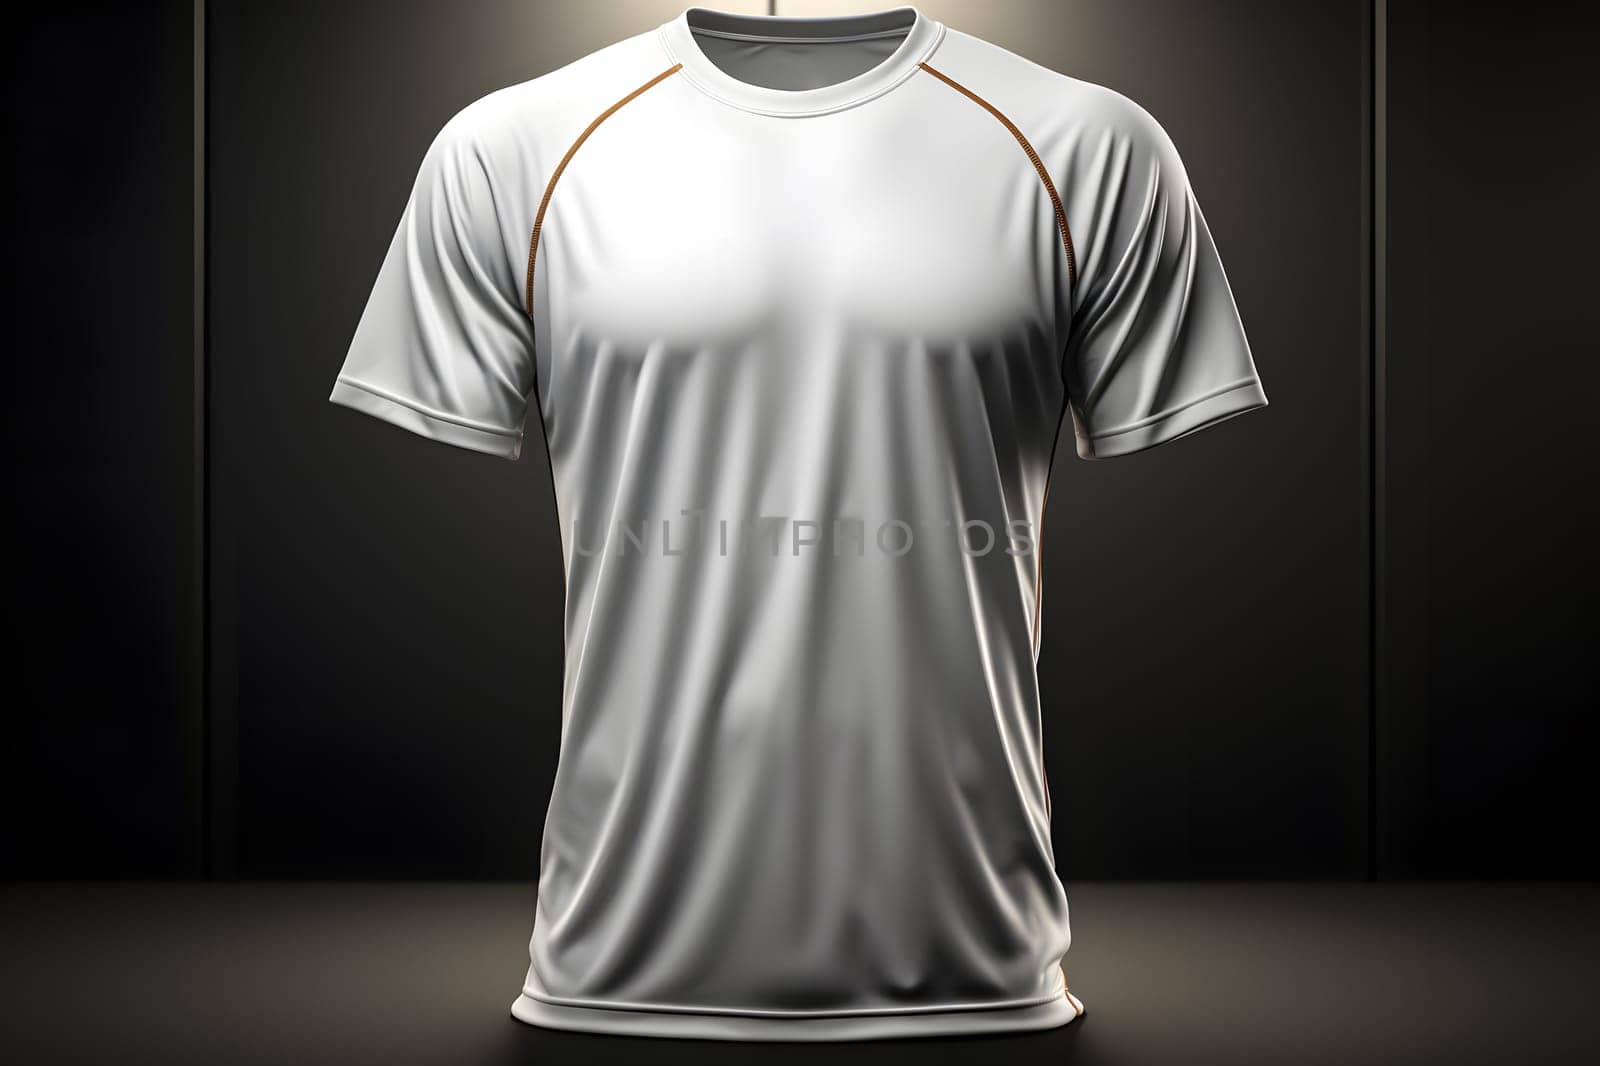 Luminous Threads: Illuminating the Artistry of a Soccer Jersey by Nadtochiy